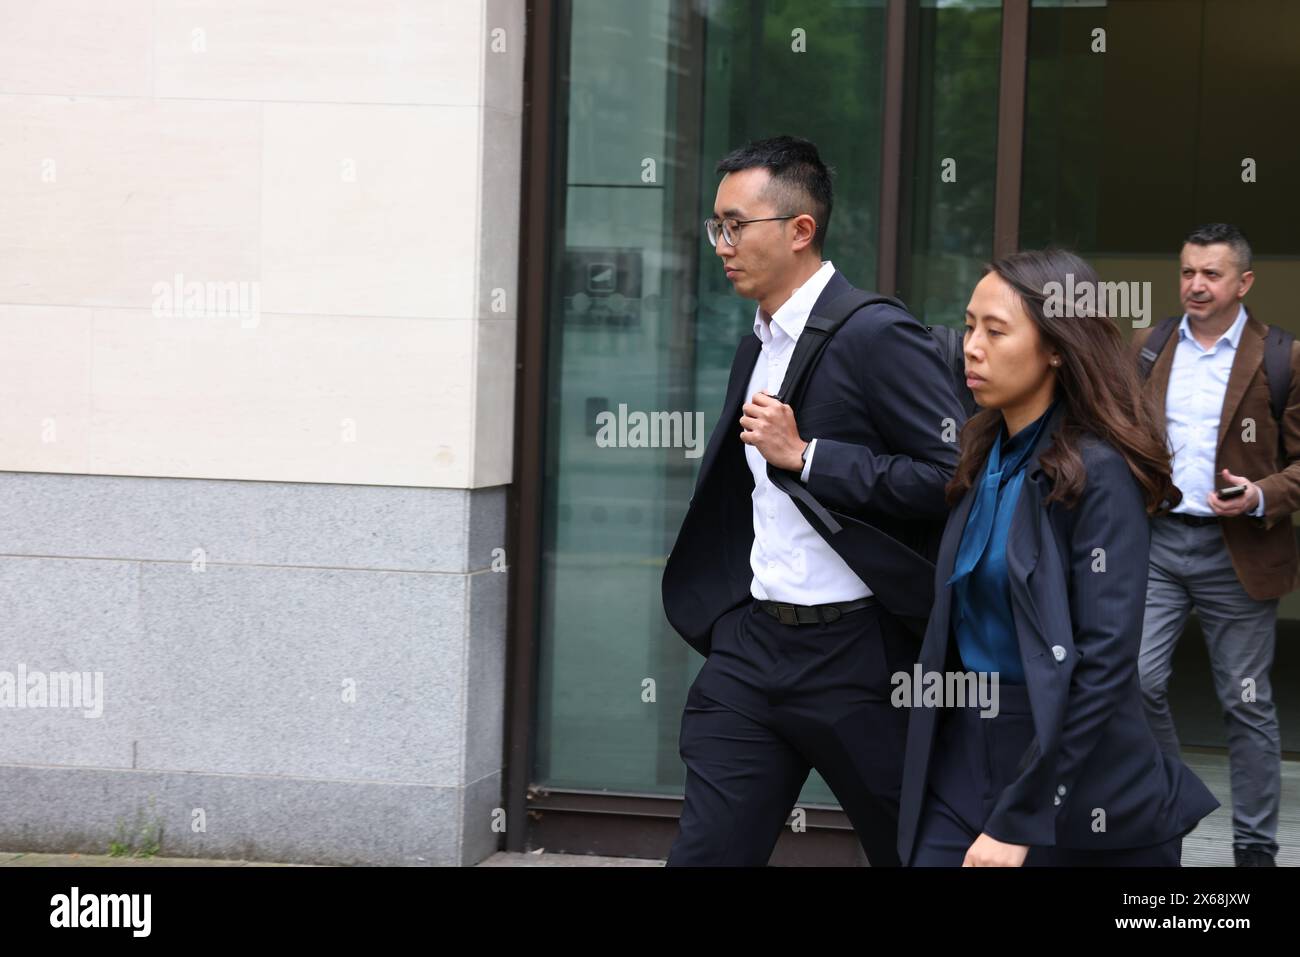 Westminster, London, UK. 13th May, 2024. Deputy Director-General of the Hong Kong Economic and Trade Office, WONG Hoi Ling, Amy, observed the bail hearing in Westminster Magistrate Court after three men were charged under the National Security Act over assisting the Hong Kong intelligence service. Credit: Shing Hei Yip/Alamy Live News Stock Photo